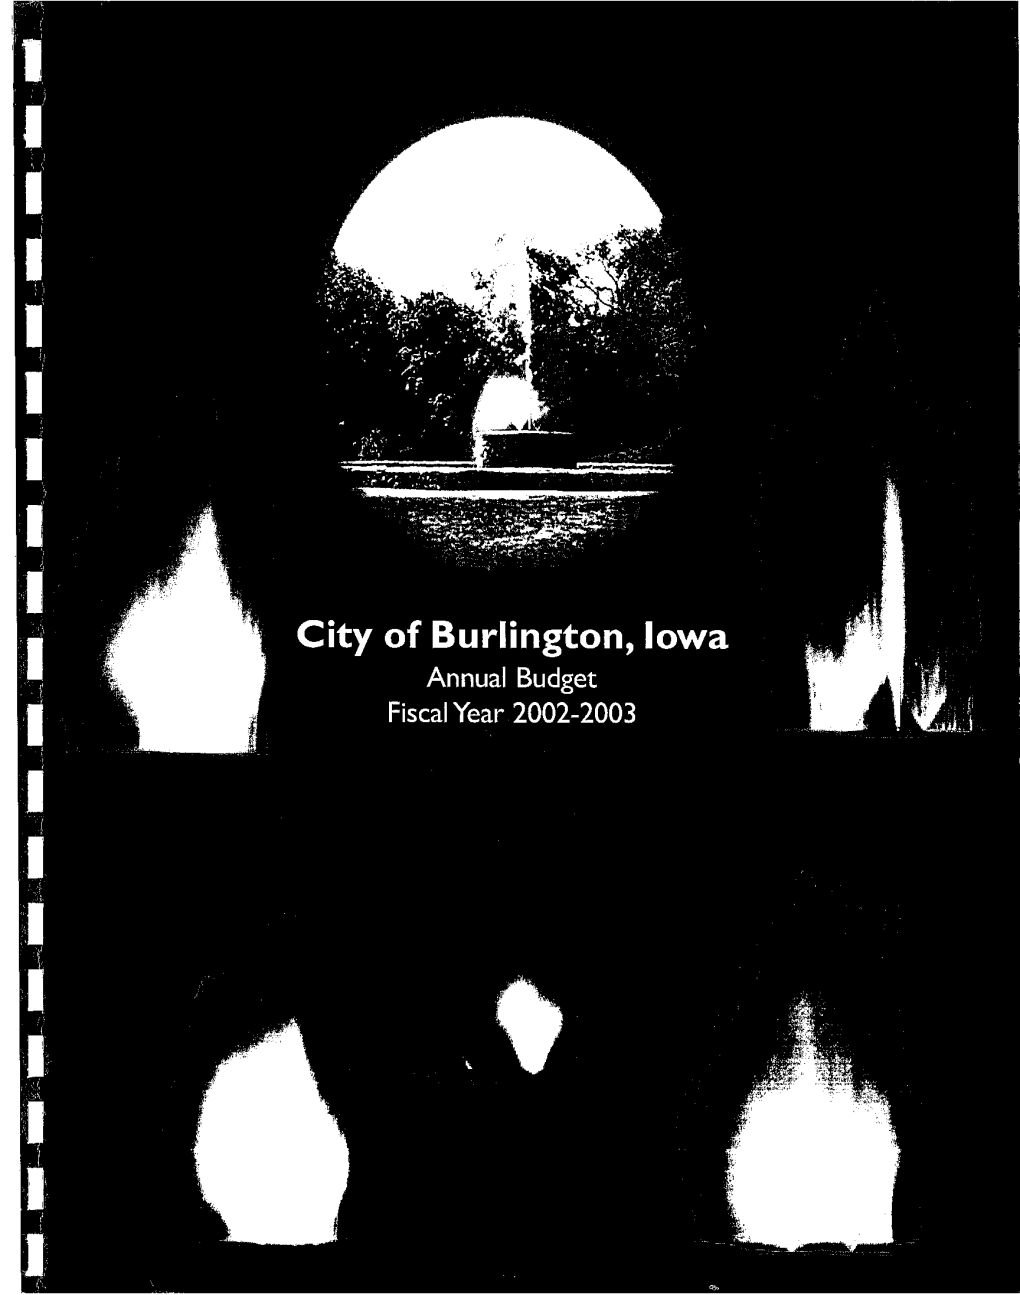 City of Burlington Annual Budget for Fiscal